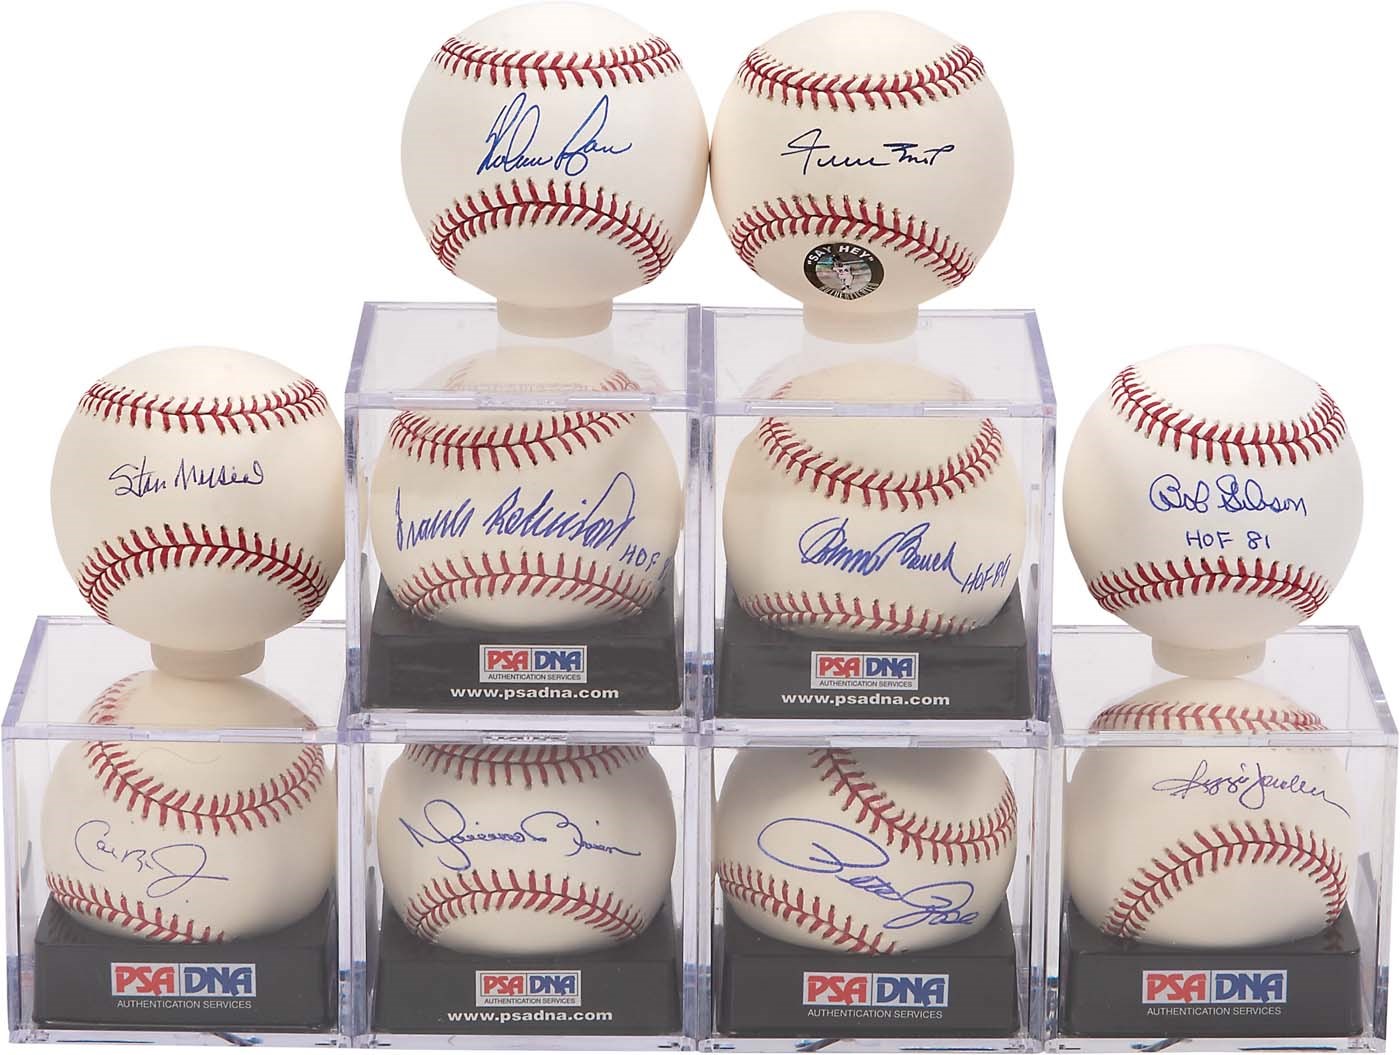 - High Grade Hall of Famers and Legends Signed Baseballs with 7 Graded by PSA (10)